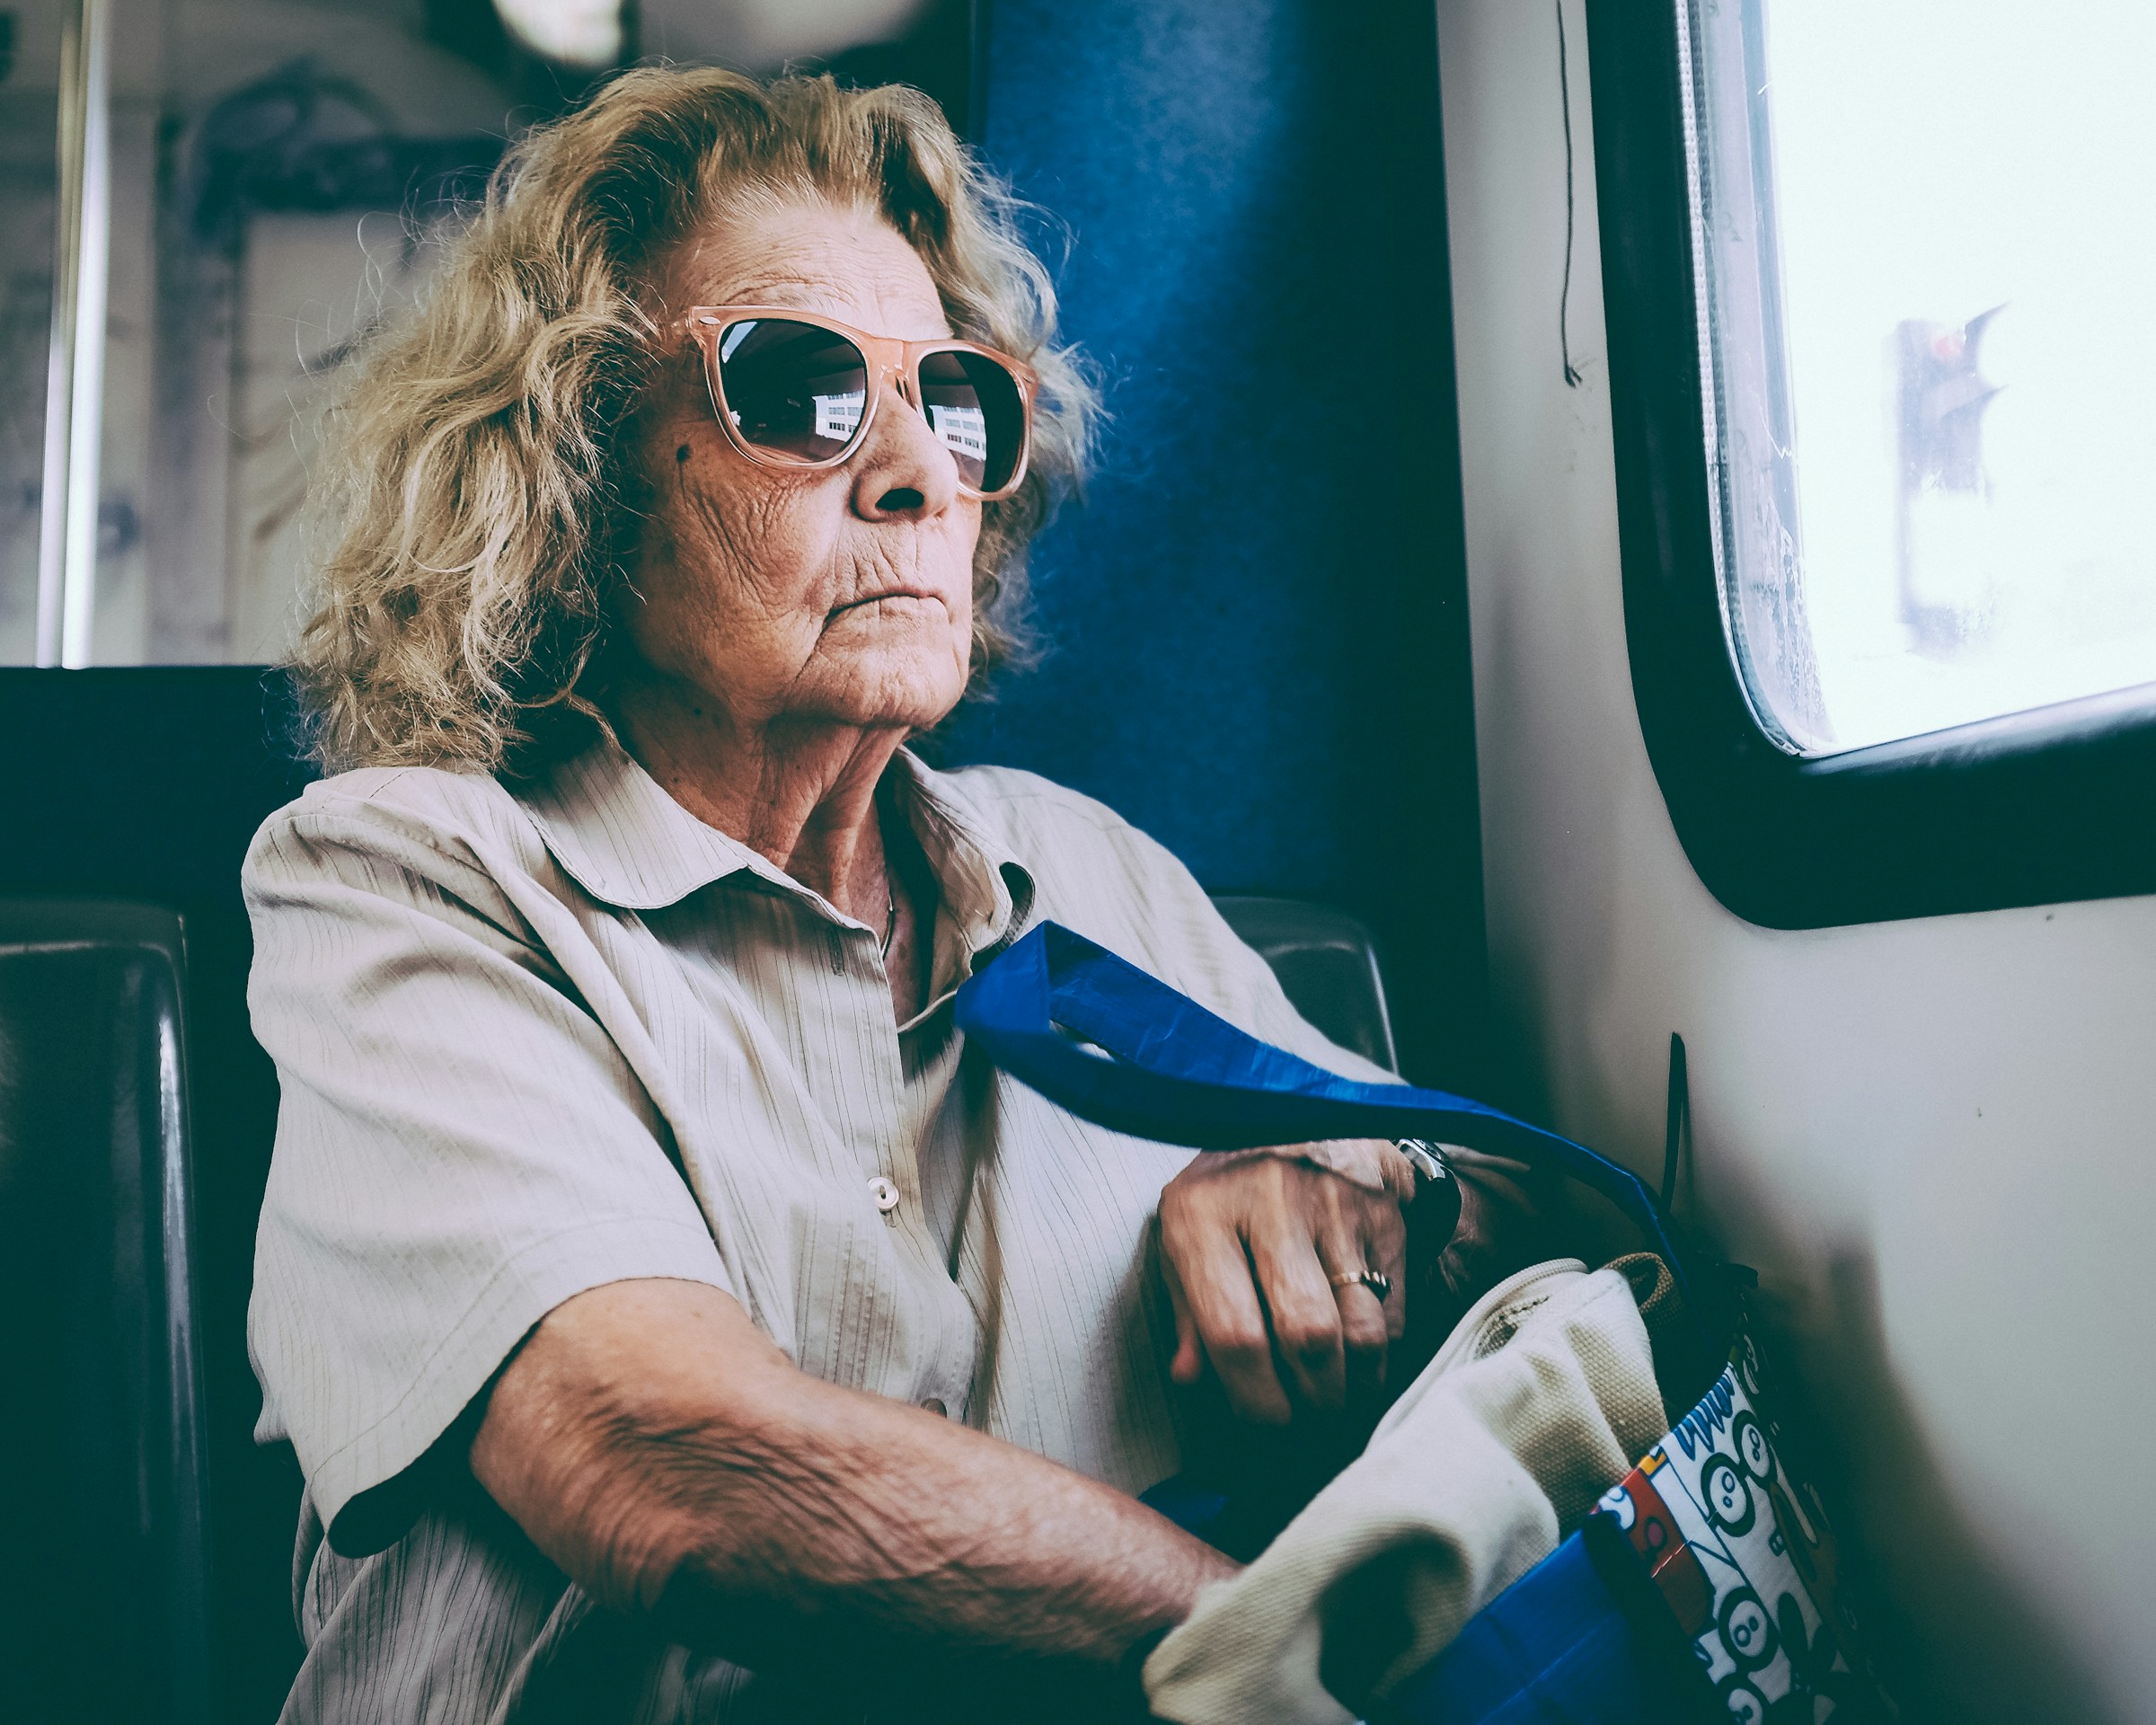 An older woman traveling in a bus | Source: Unsplash